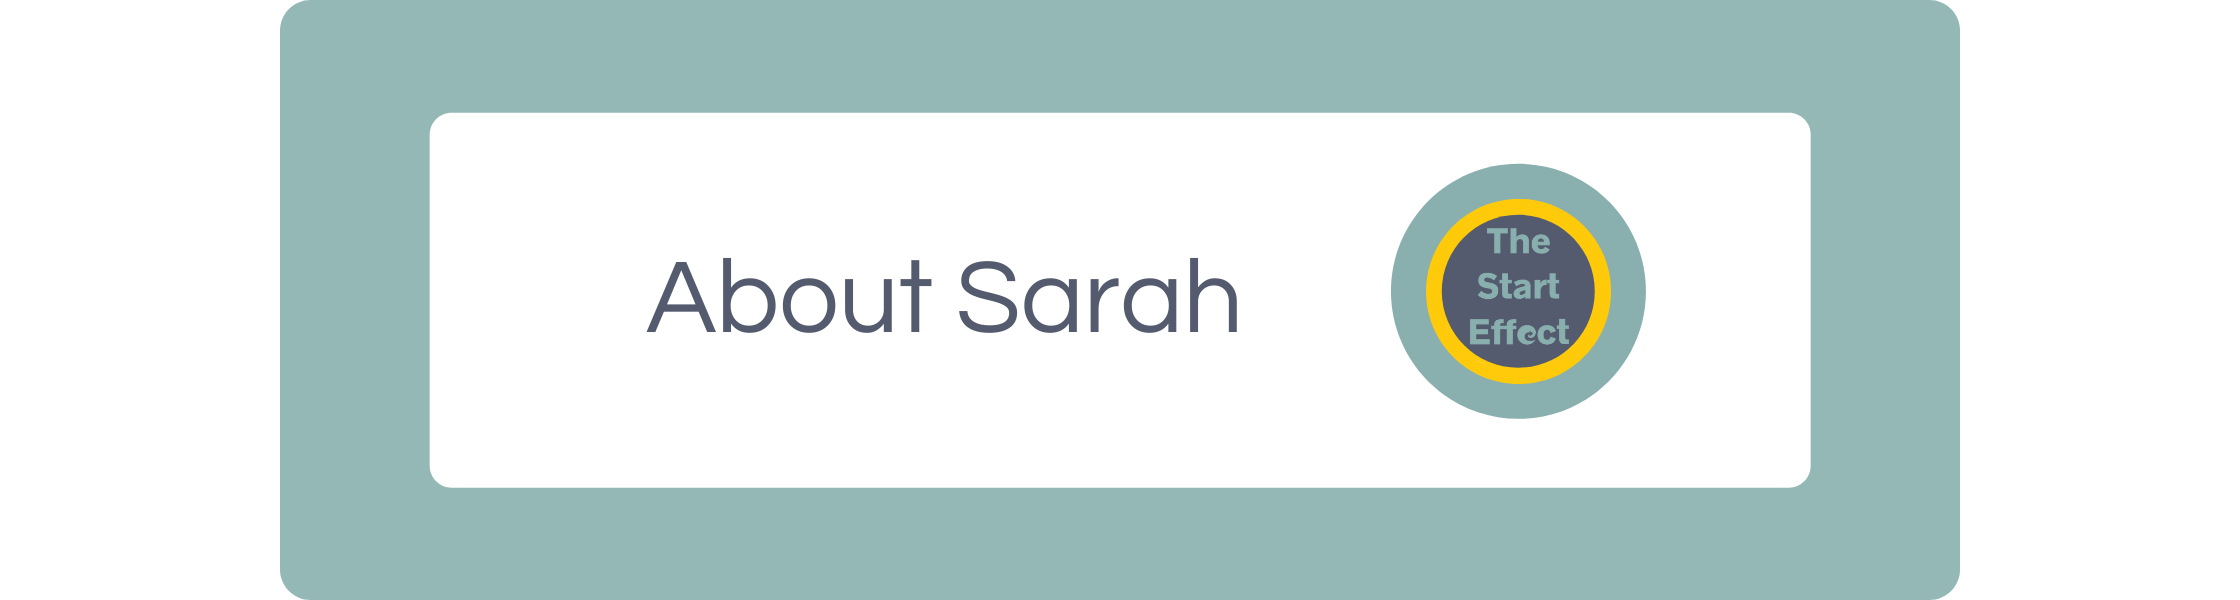 About Sarah button surrounded by dark teal border